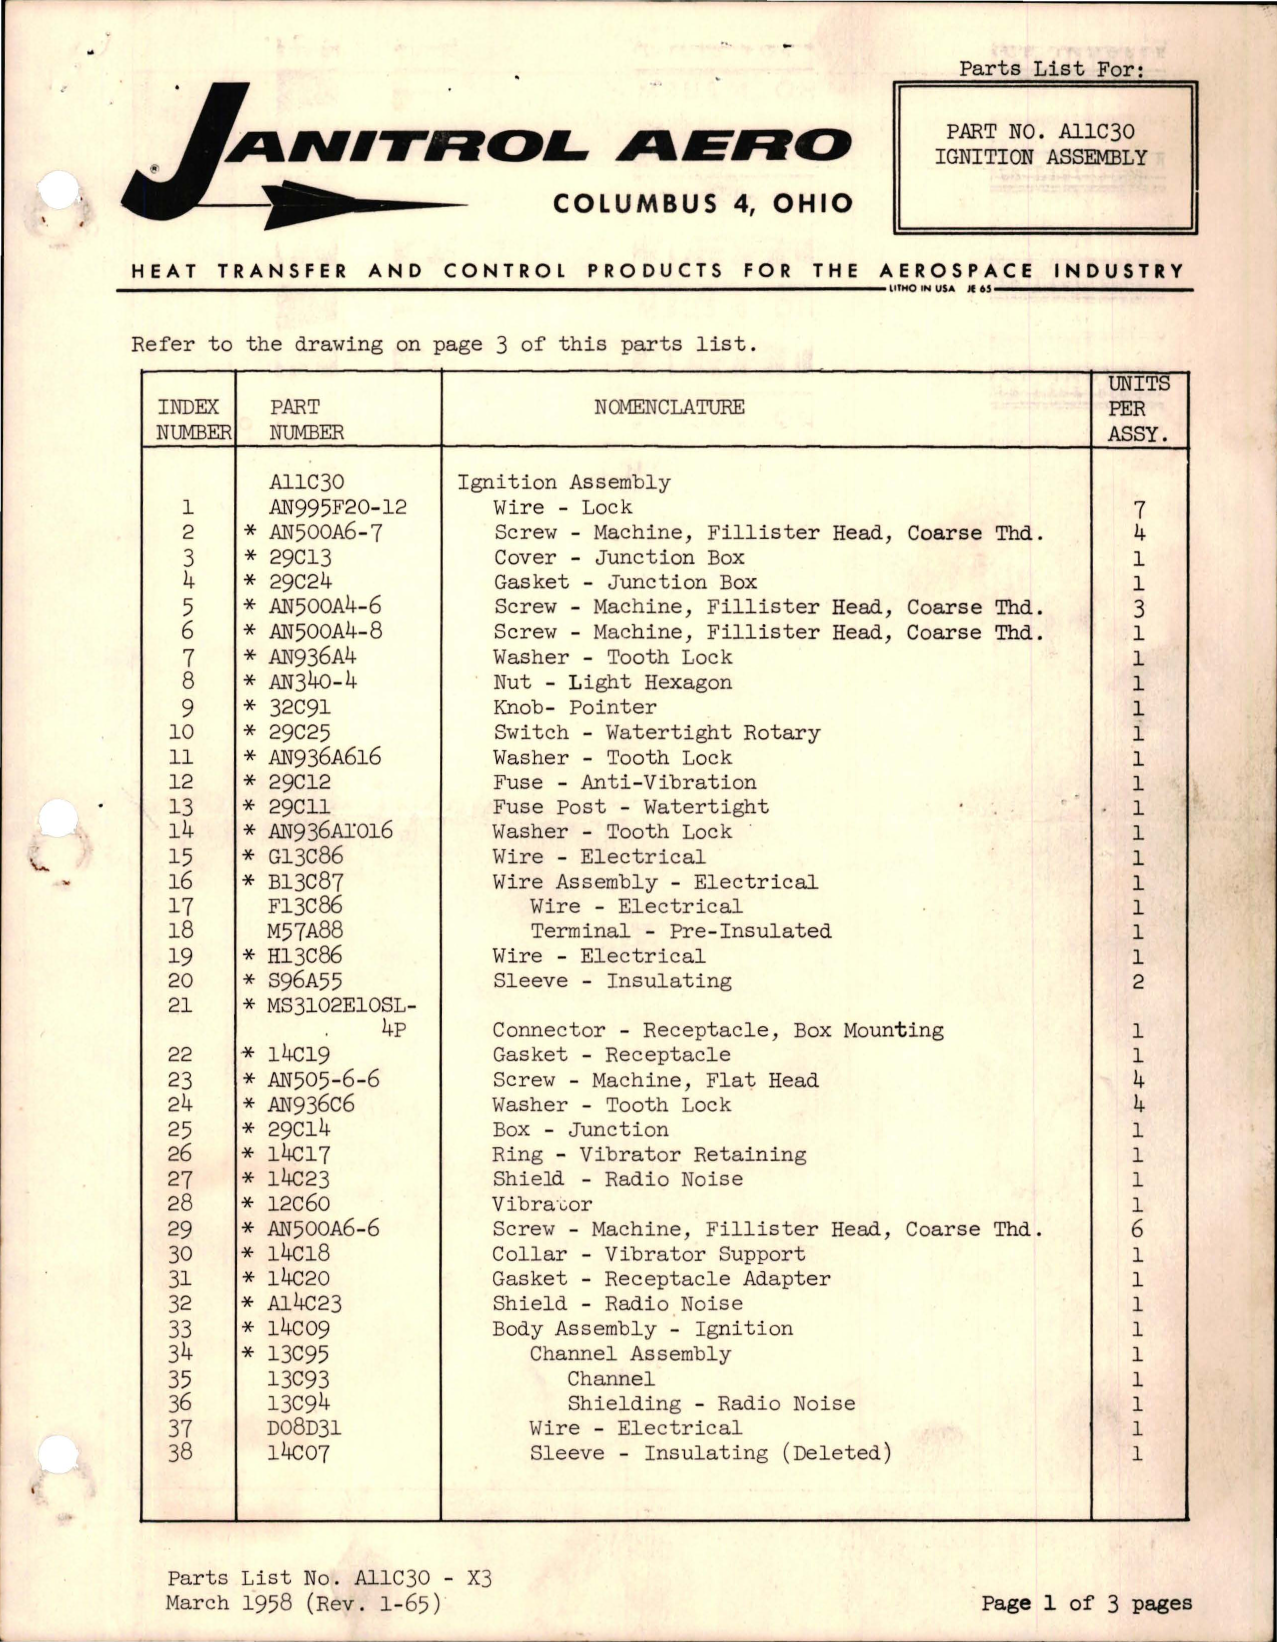 Sample page 1 from AirCorps Library document: Parts List for Ignition Assembly - Part A11C30